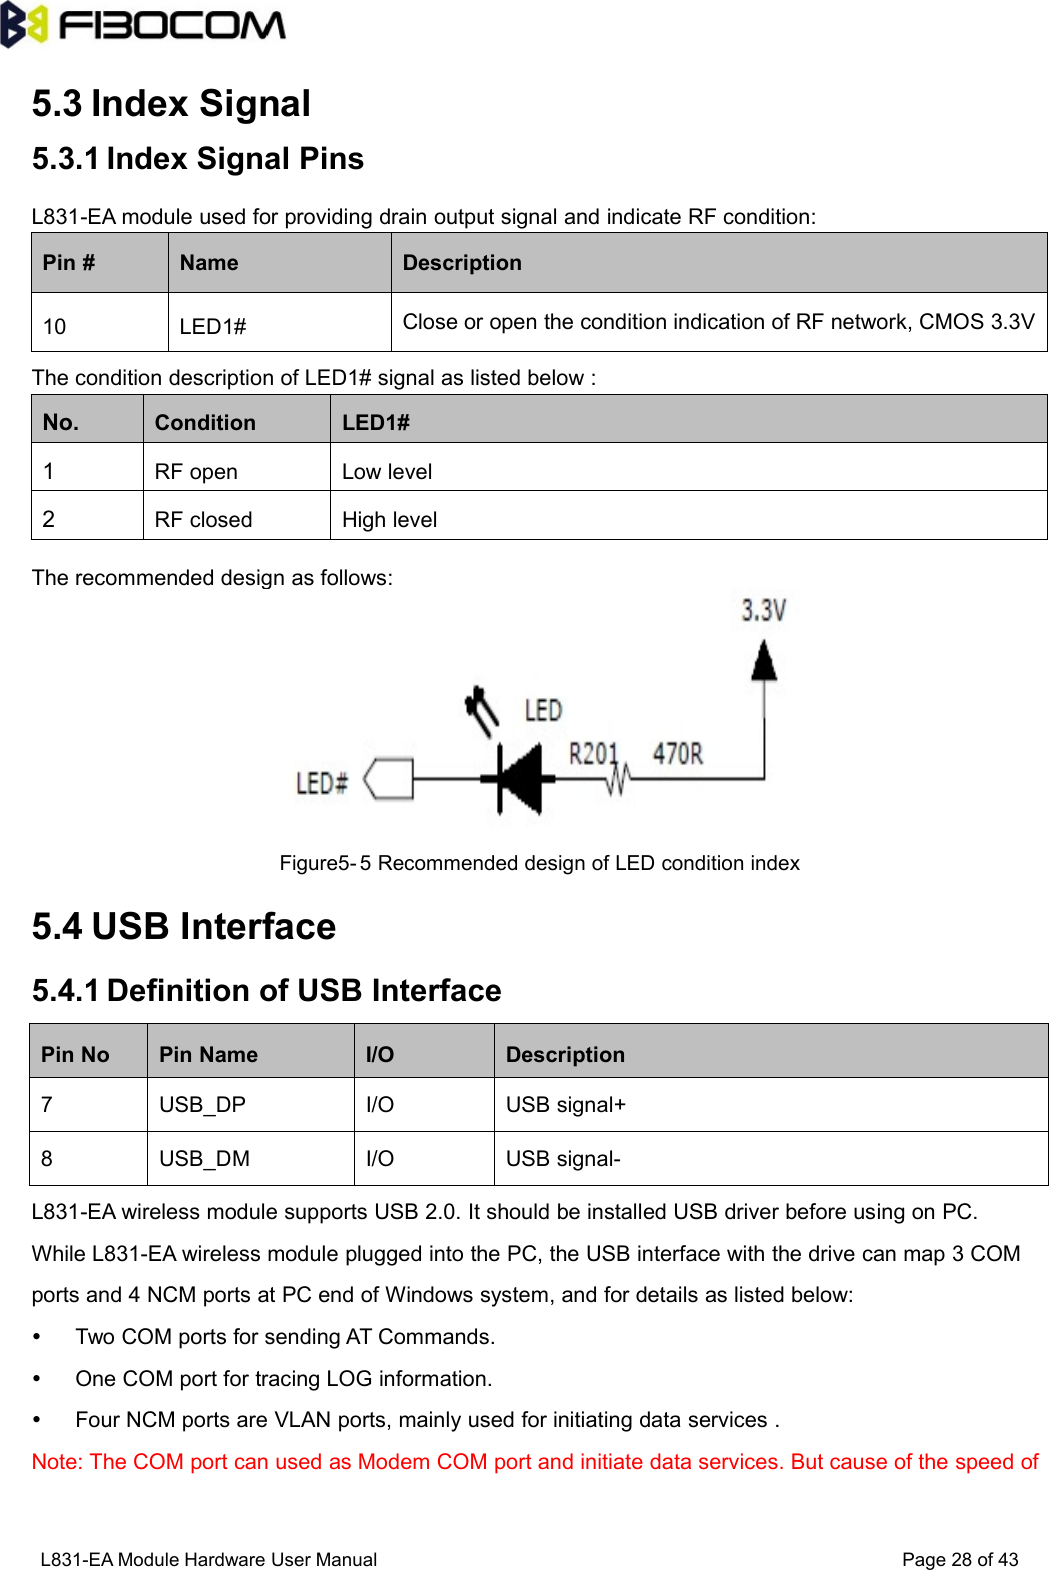 L831-EA Module Hardware User Manual Page28of435.3 Index Signal5.3.1 Index Signal PinsL831-EA module used for providing drain output signal and indicate RF condition:Pin #NameDescription10LED1#Close or open the condition indication of RF network, CMOS 3.3VThe condition description of LED1# signal as listed below :No.ConditionLED1#1RF openLow level2RF closedHigh levelThe recommended design as follows:Figure5- 5 Recommended design of LED condition index5.4 USB Interface5.4.1 Definition of USB InterfacePin NoPin NameI/ODescription7USB_DPI/OUSB signal+8USB_DMI/OUSB signal-L831-EA wireless module supports USB 2.0. It should be installed USB driver before using on PC.While L831-EA wireless module plugged into the PC, the USB interface with the drive can map 3 COMports and 4 NCM ports at PC end of Windows system, and for details as listed below:Two COM ports for sending AT Commands.One COM port for tracing LOG information.Four NCM ports are VLAN ports, mainly used for initiating data services .Note: The COM port can used as Modem COM port and initiate data services. But cause of the speed of